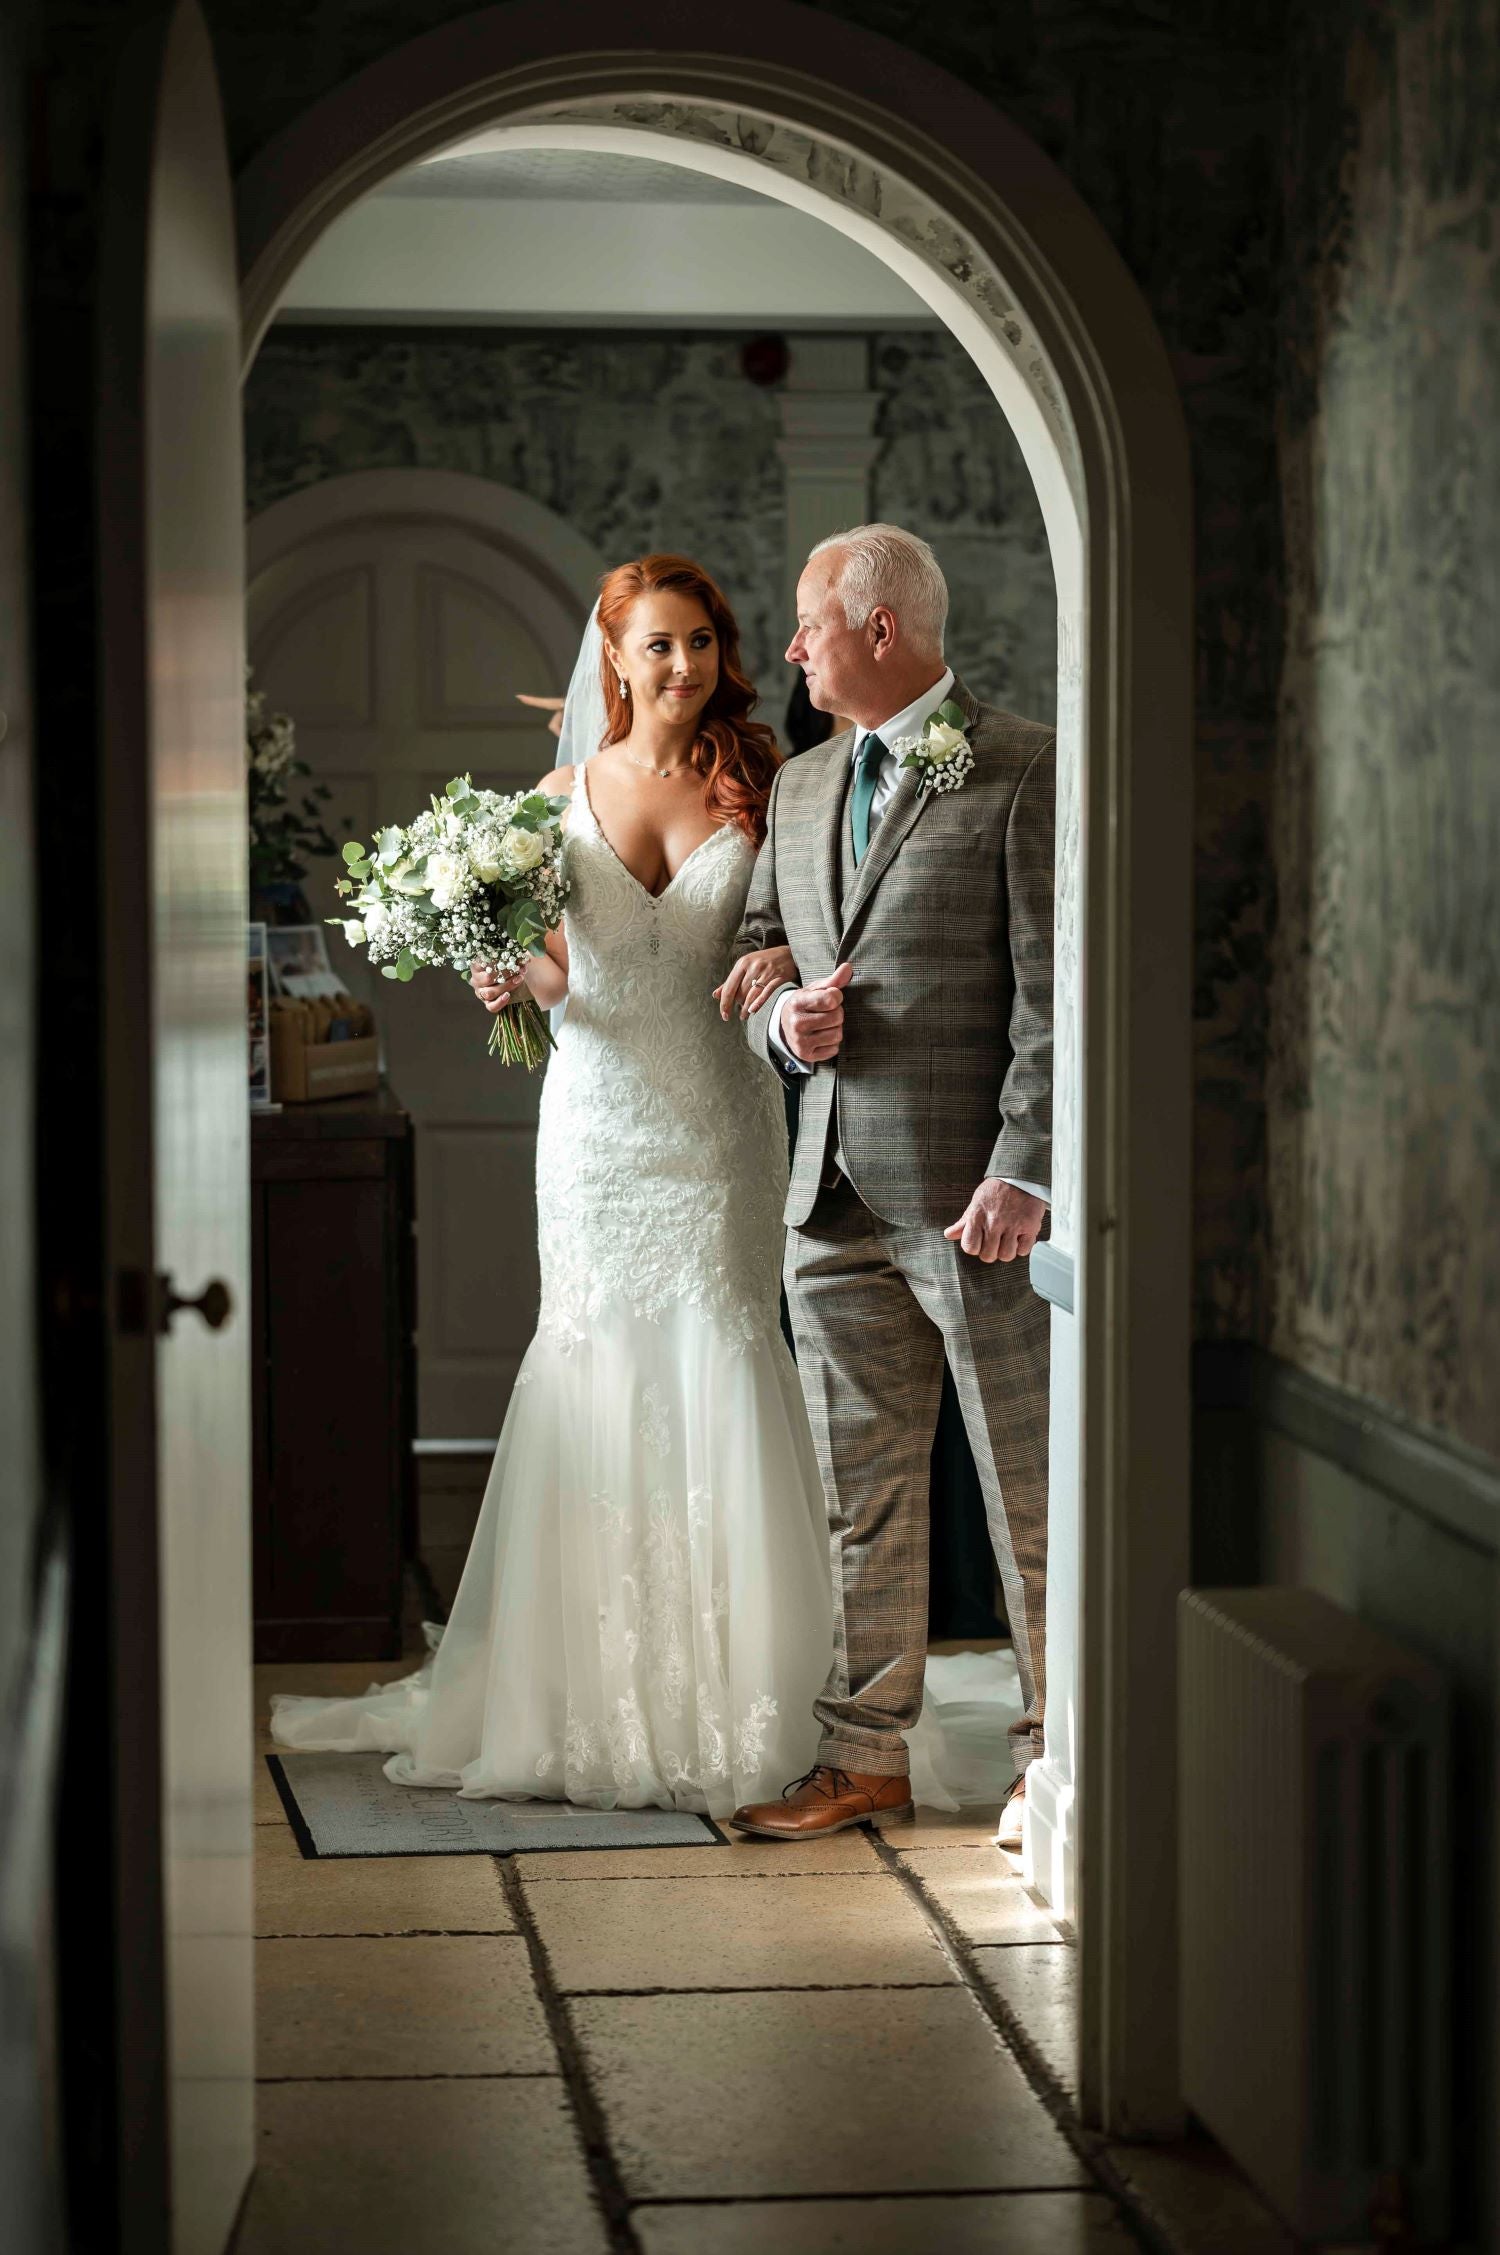 Weddings at Old Rectory House